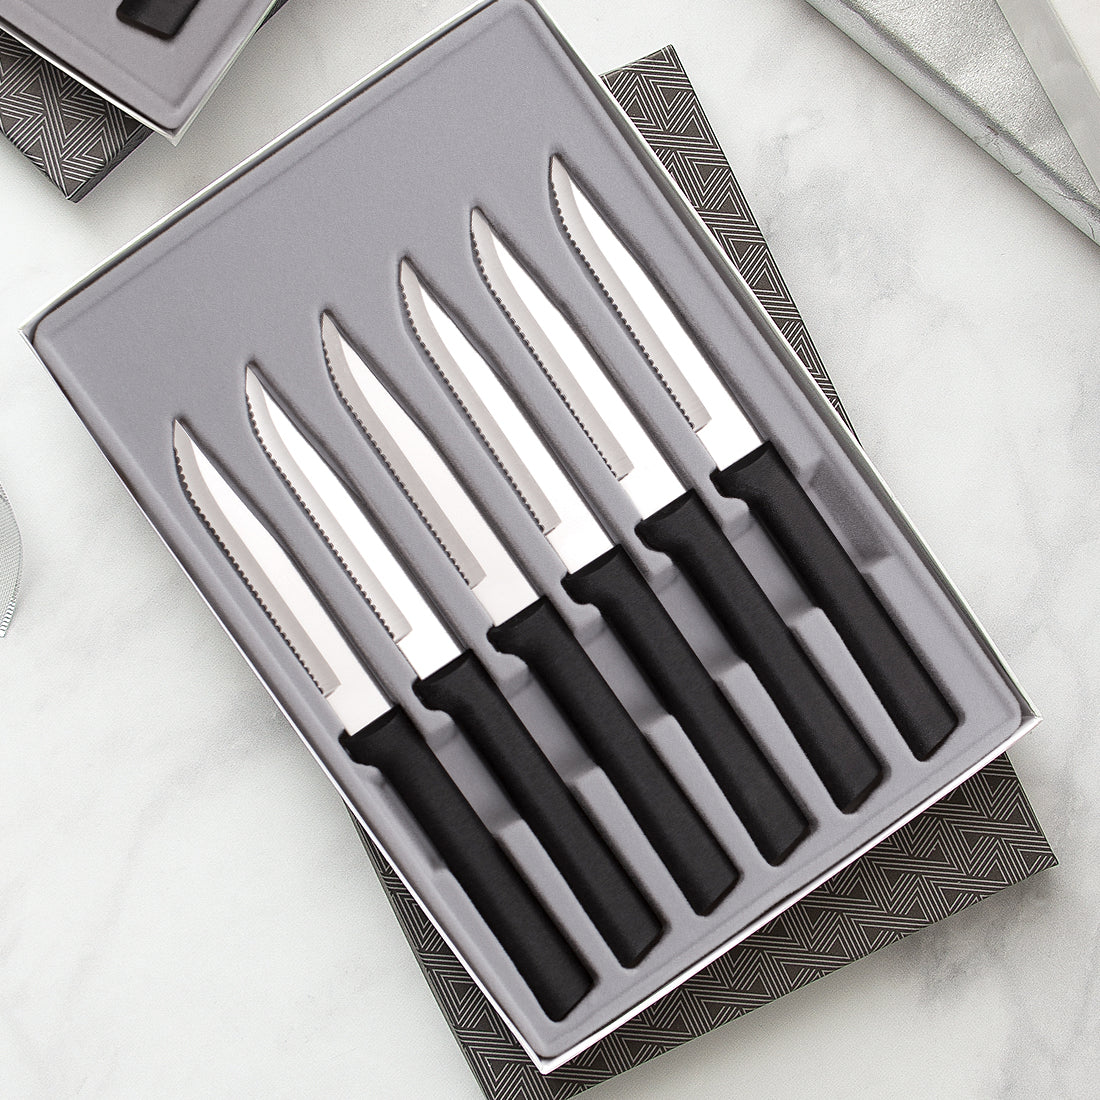 Rada Cutlery Six Serrated Steak Knives Gift Set with silver handles in black-lined gift box. 